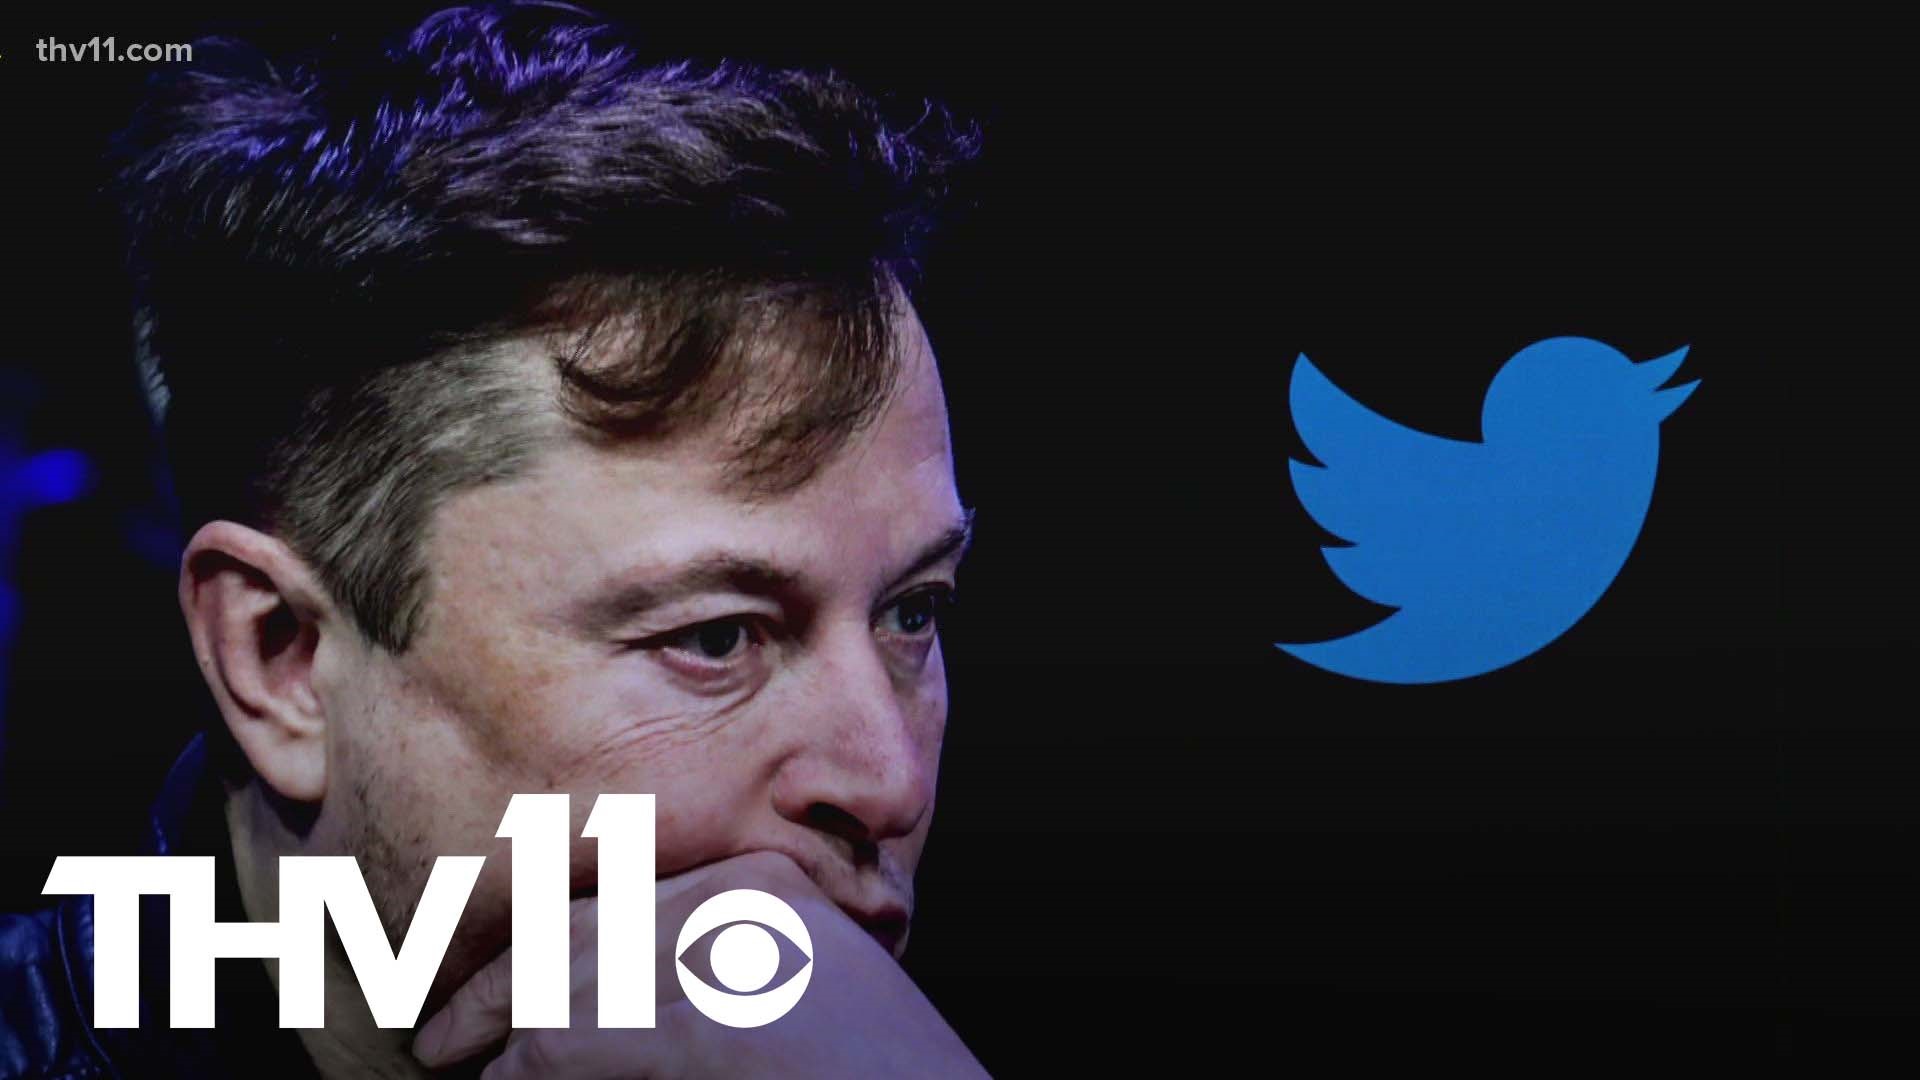 Musk tweeted, launched a 12-hour poll asking if he should step down as head of Twitter.